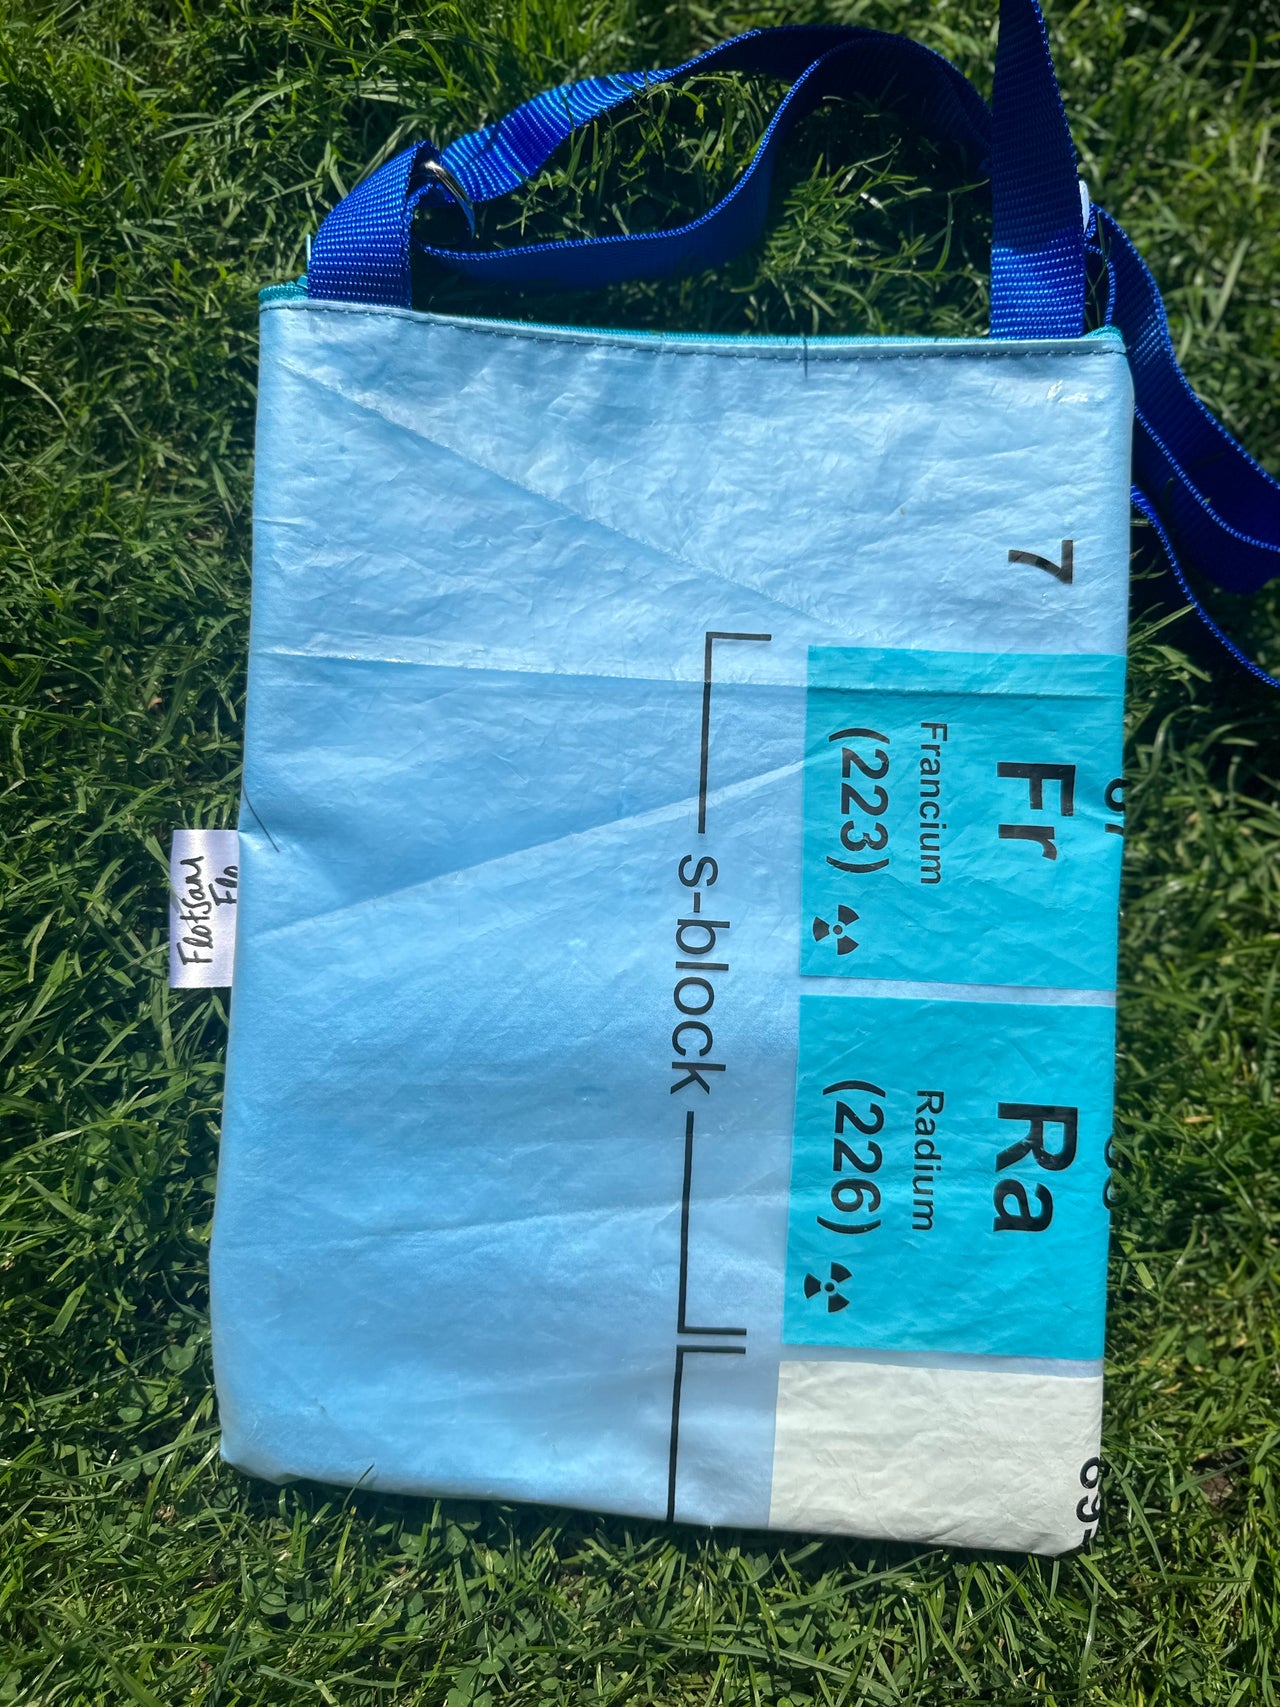 I used to be a Banner and Periodic Table Shower Curtain - Cross body bag